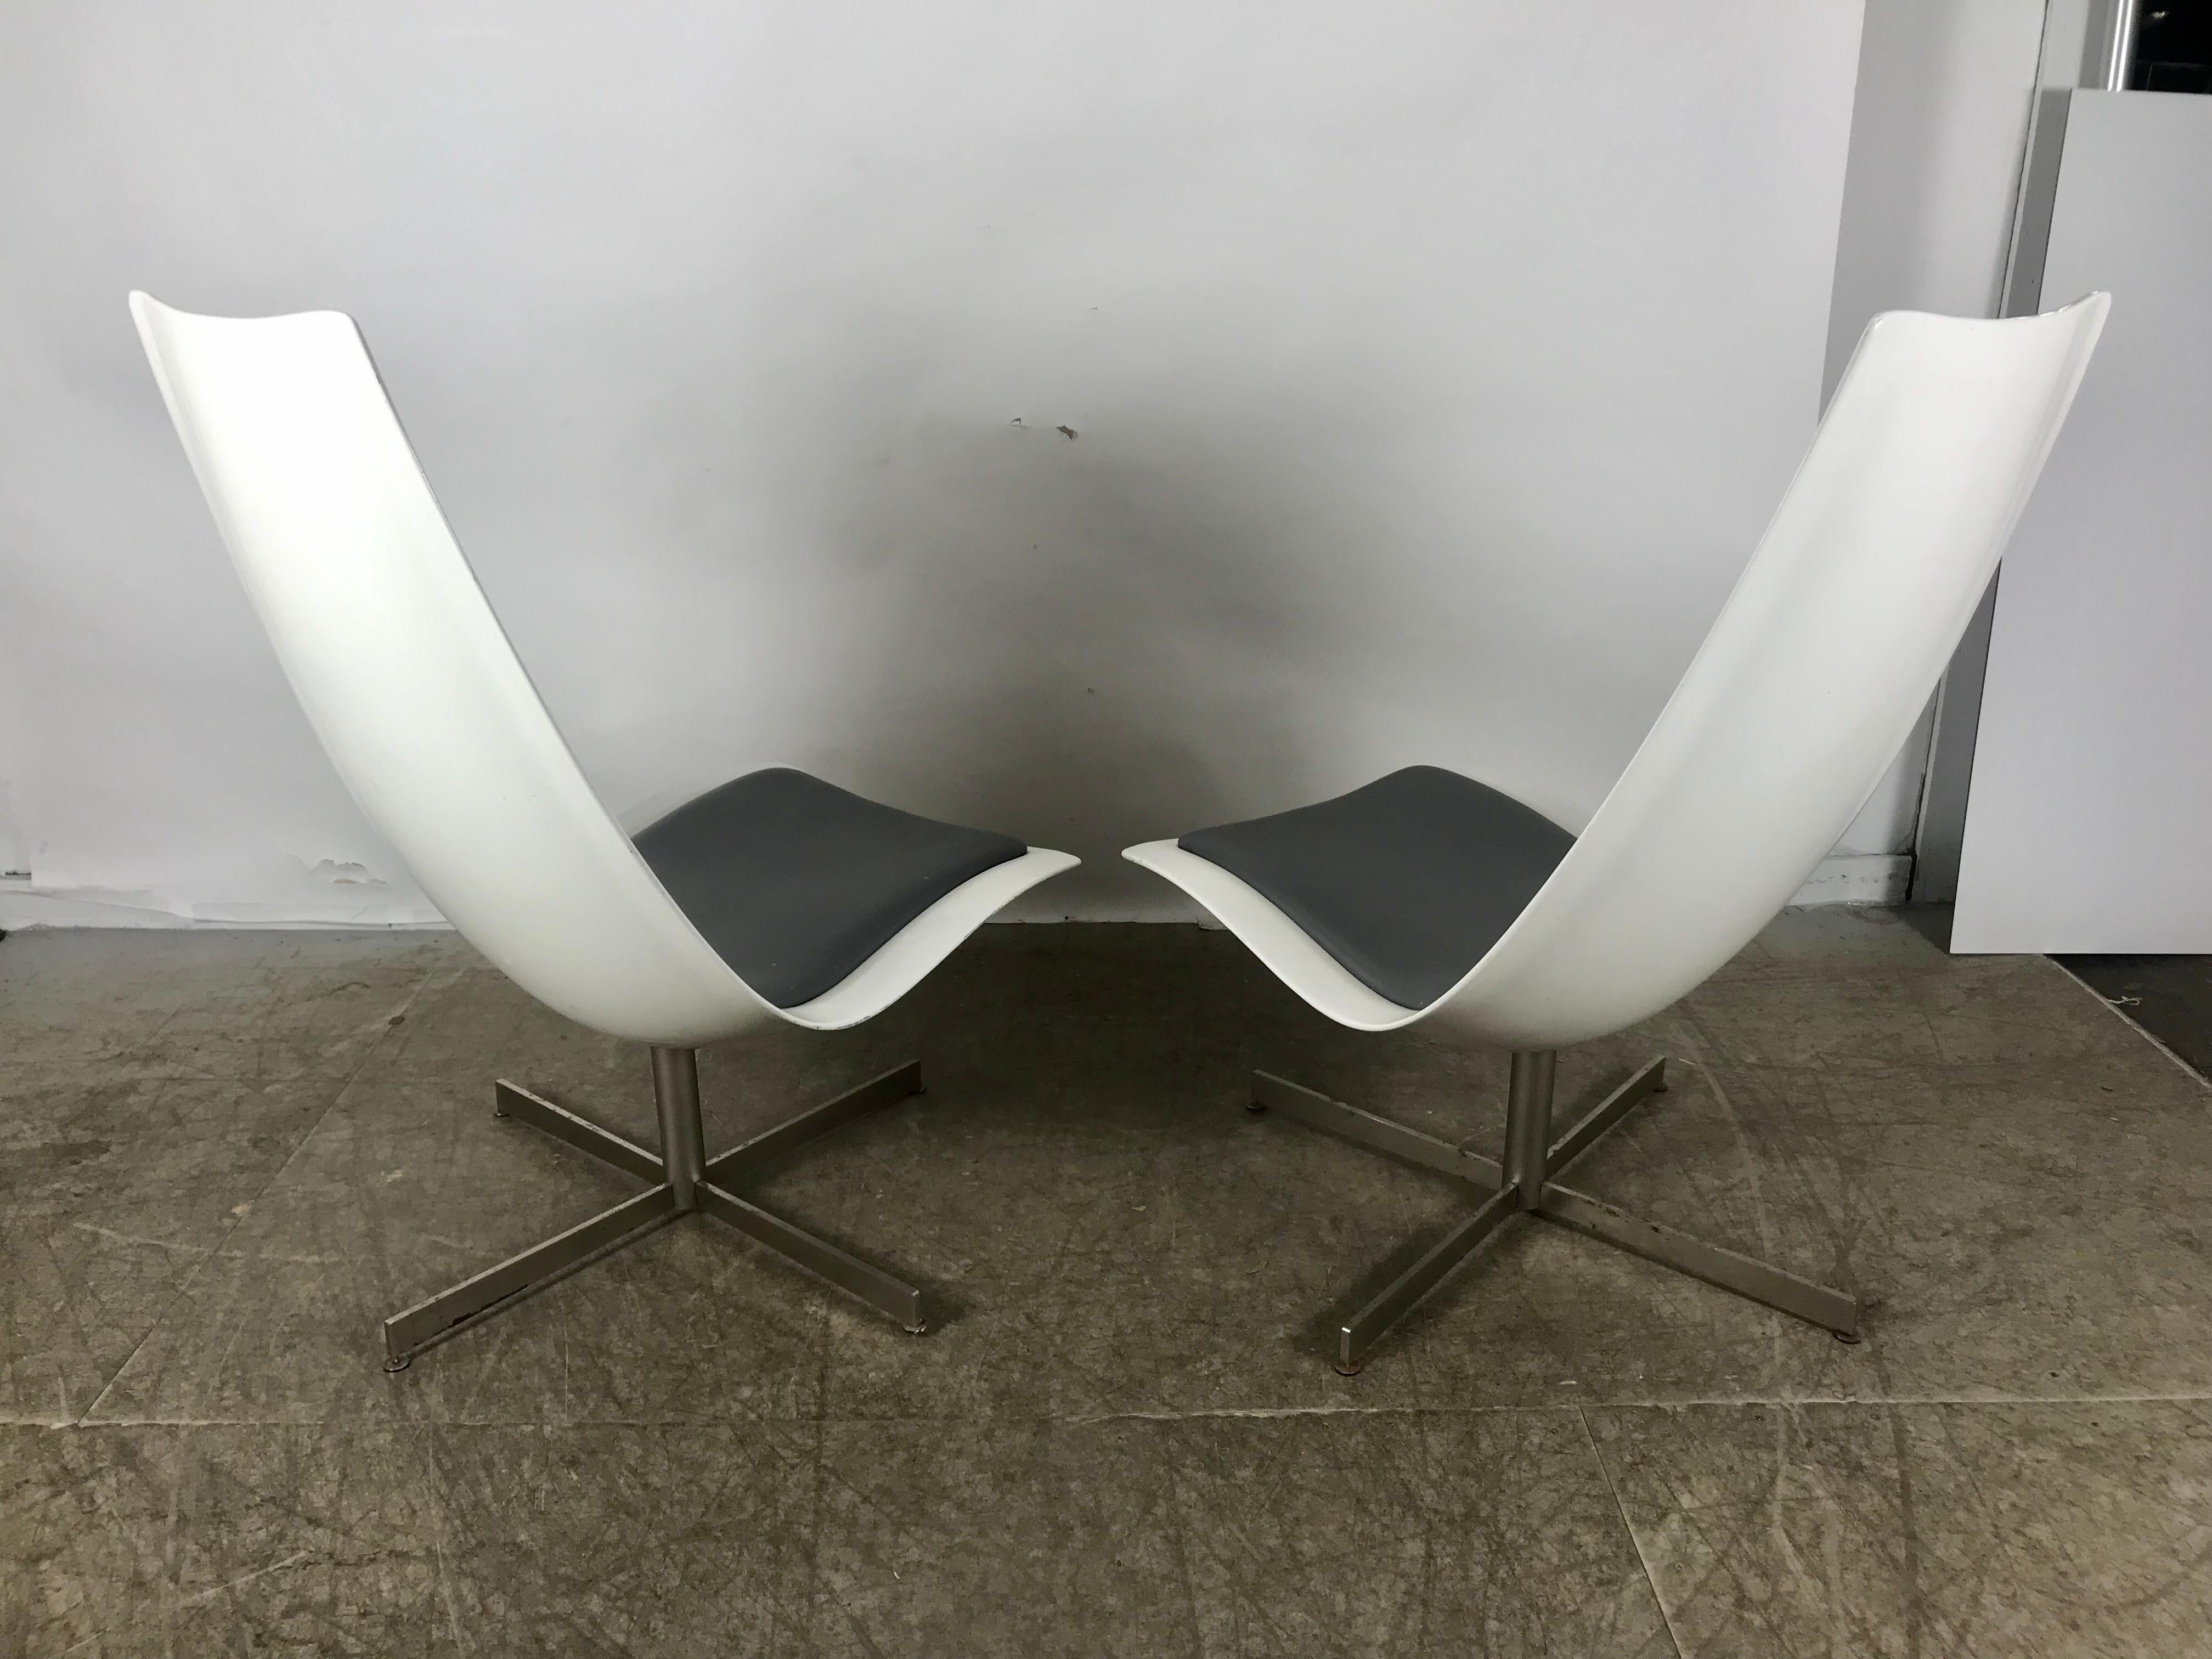 Pair of Space Age high back fiberglass swivel chairs, possible prototypes made for Expo 67 (Montreal). Exceptional quality and construction, heavy fiberglass, stainless steel bases. Retains original gun-metal grey Naugahyde back and seat pads.